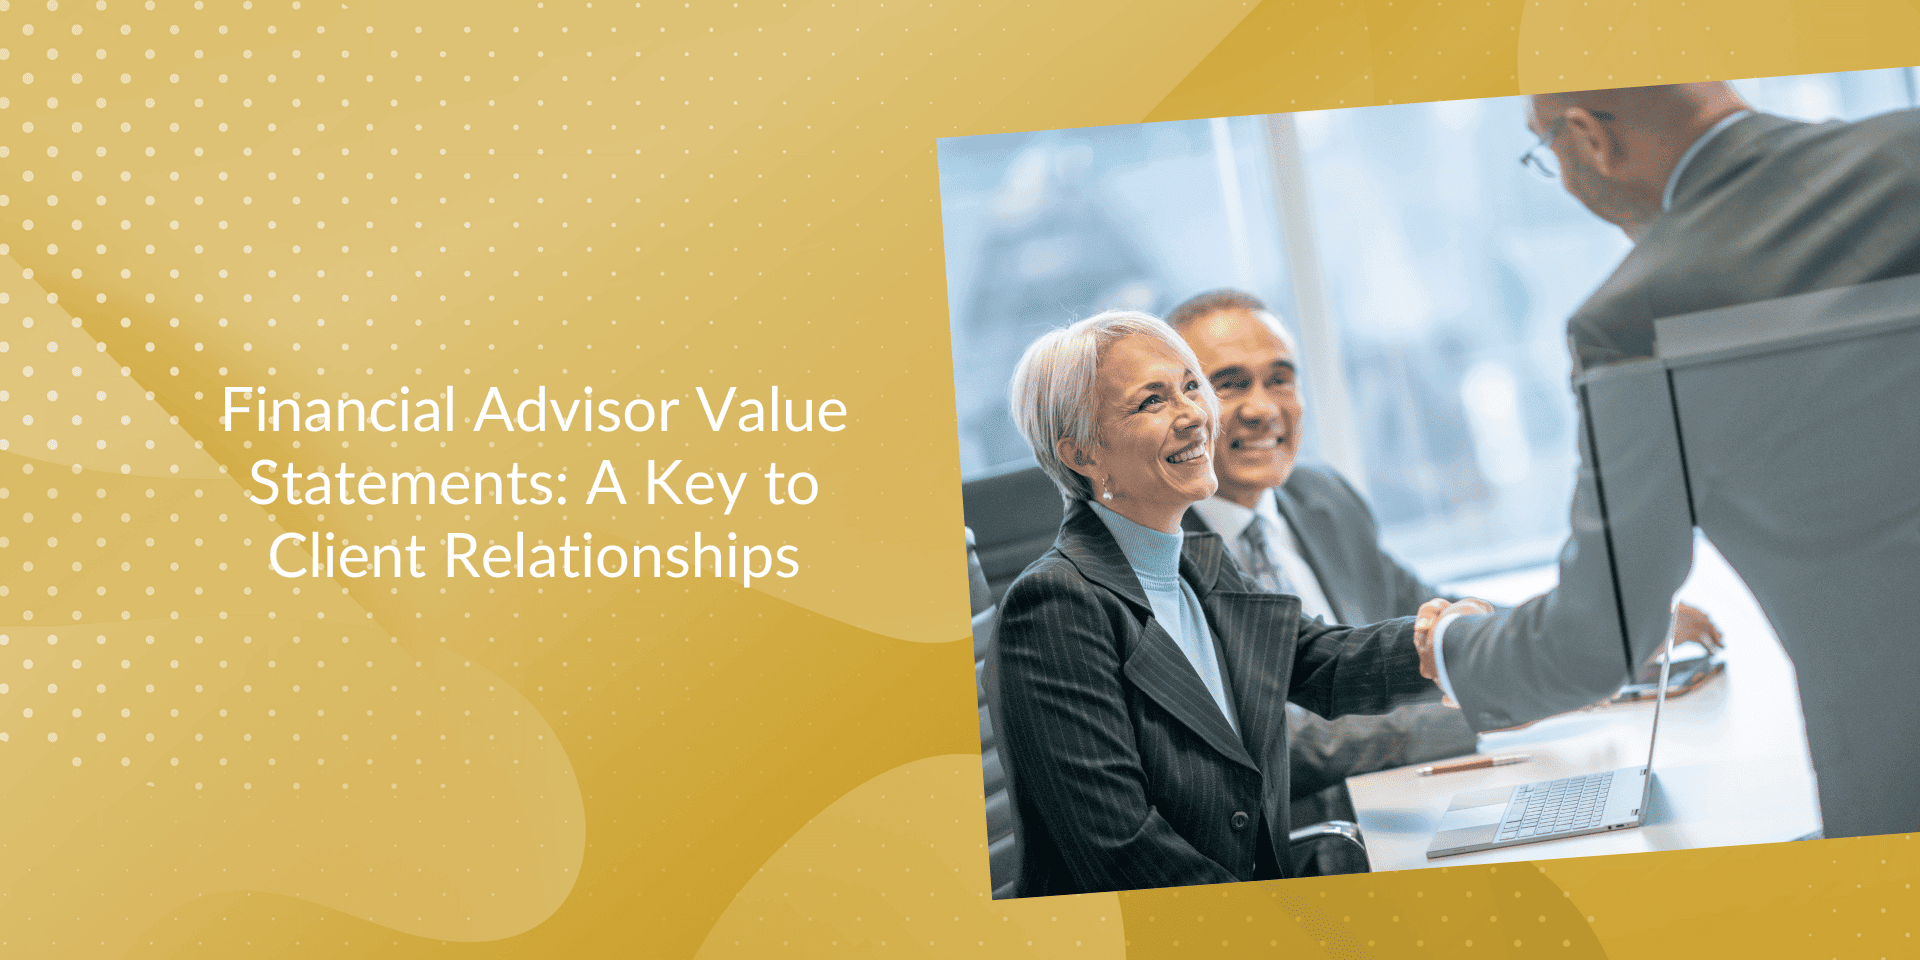 Financial Advisor Value Statements: A Key to Client Relationships